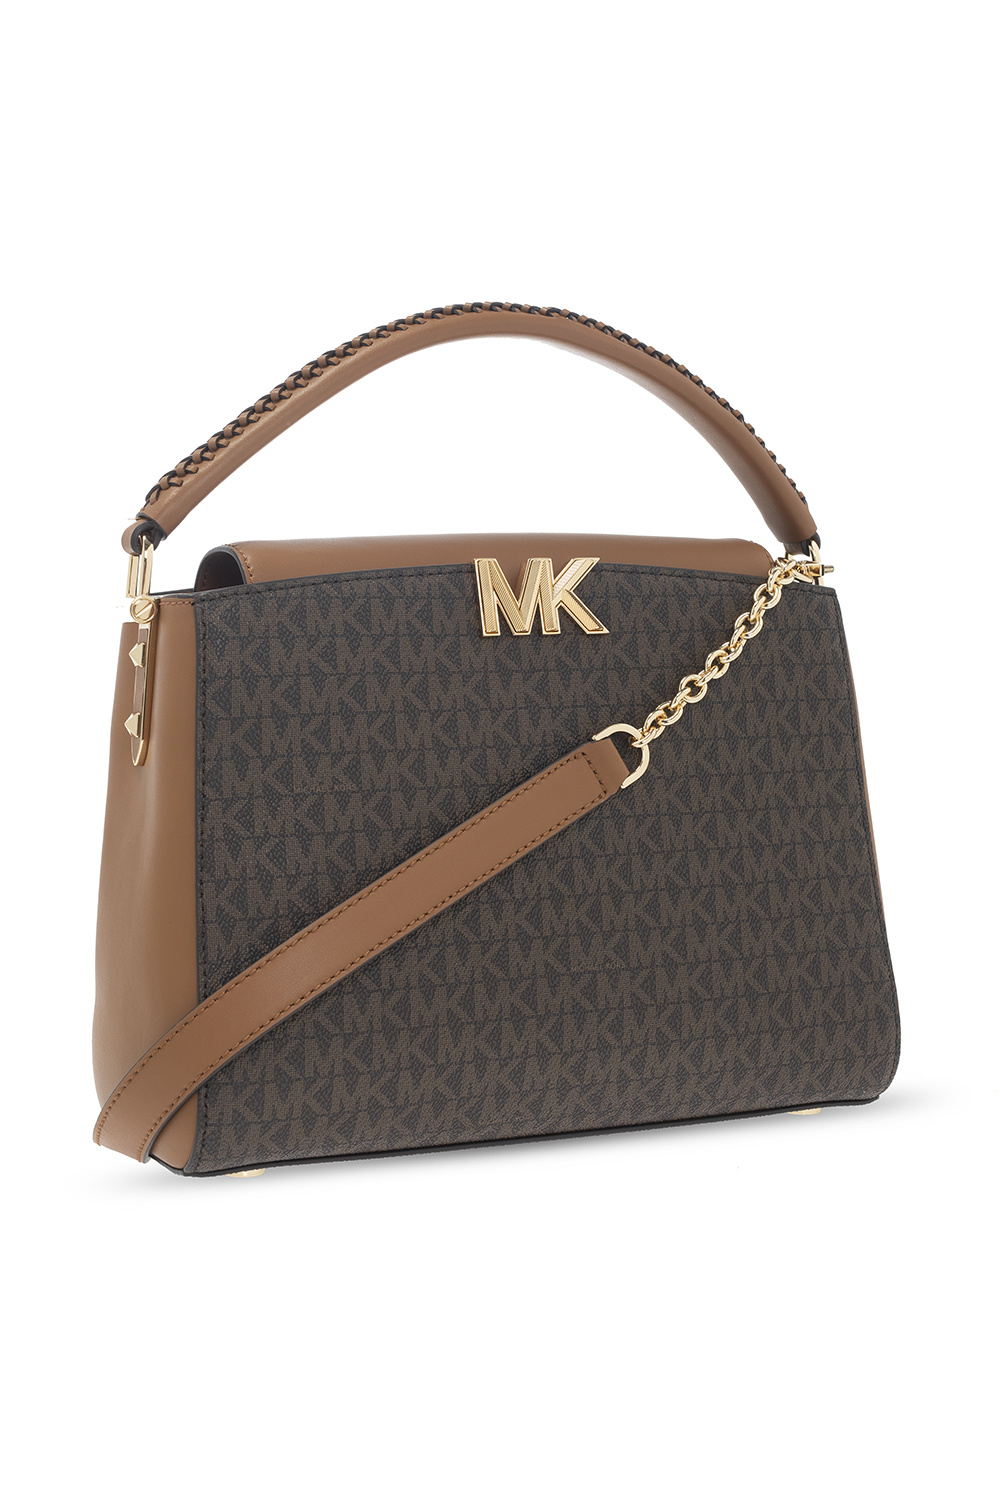 Michael Kors - Haute hardware: every Karlie bag is finished with our luxe  new MK logo. #WheresKarlie #MichaelKors